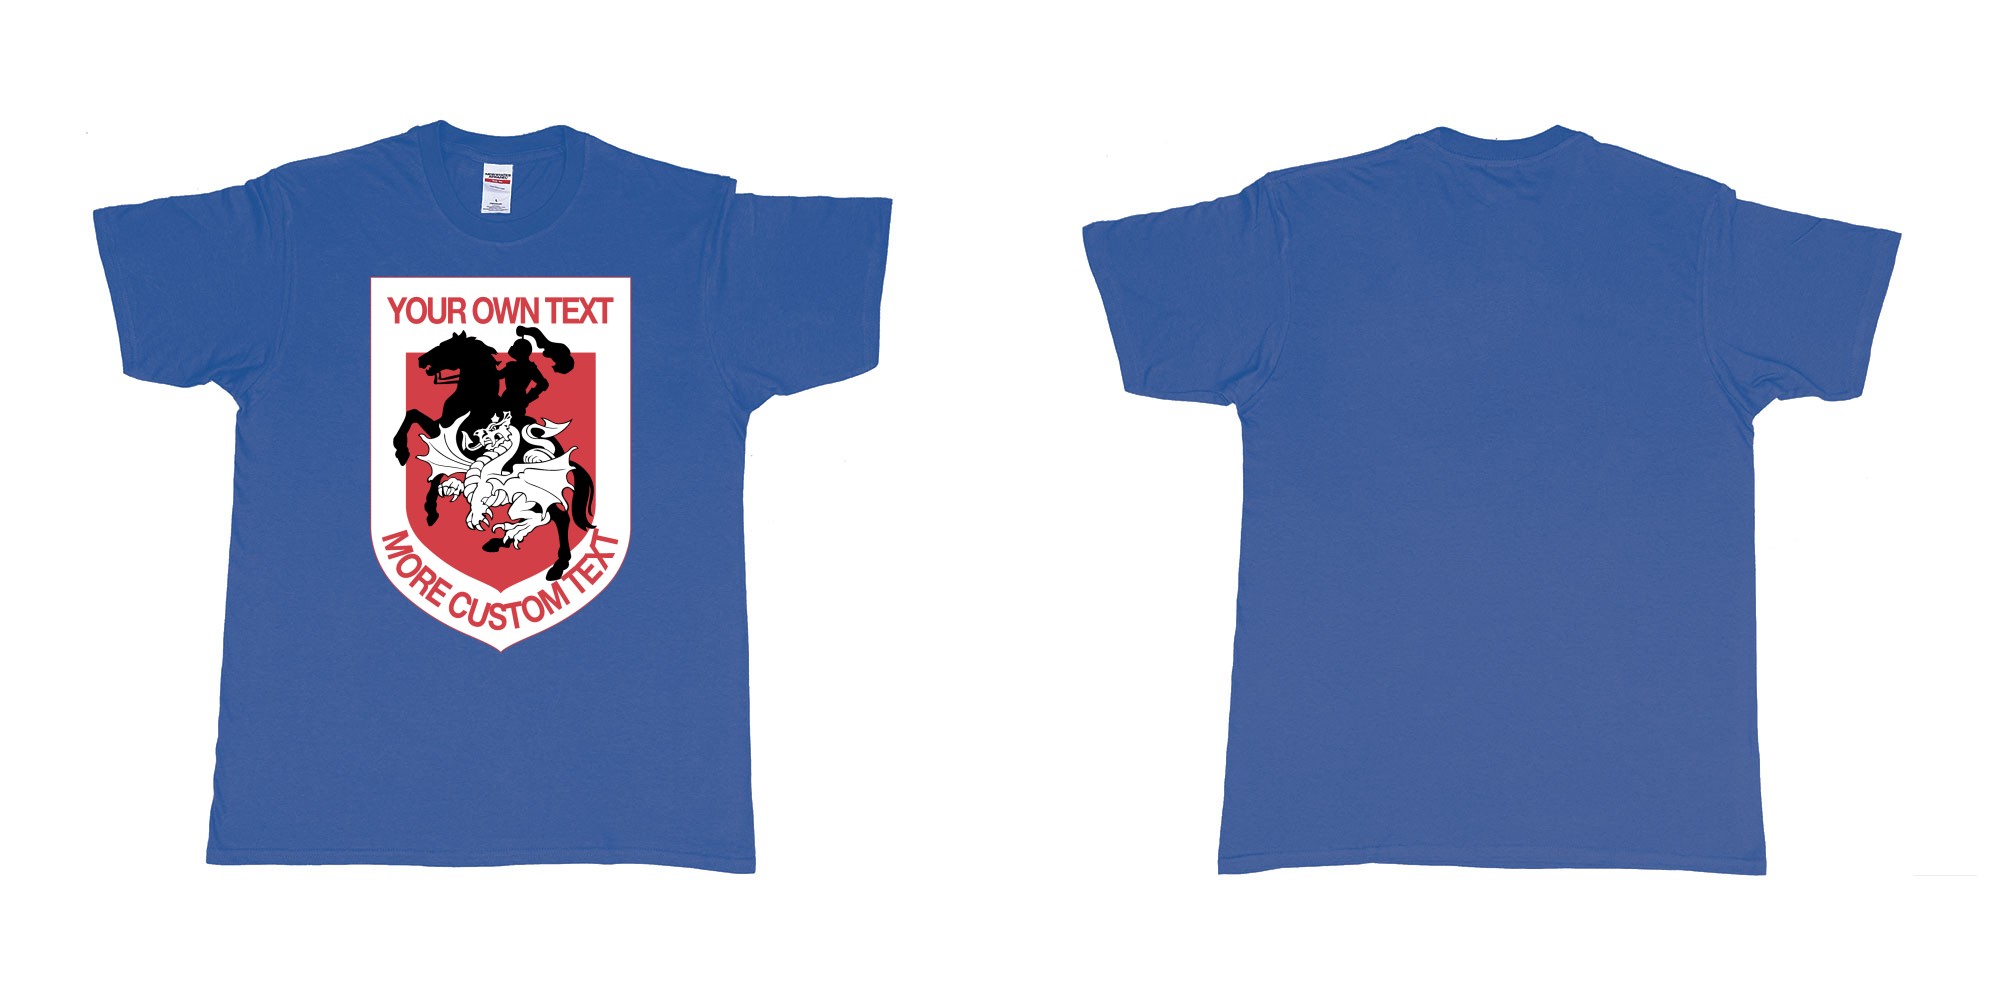 Custom tshirt design st george illawarra dragons custom design in fabric color royal-blue choice your own text made in Bali by The Pirate Way